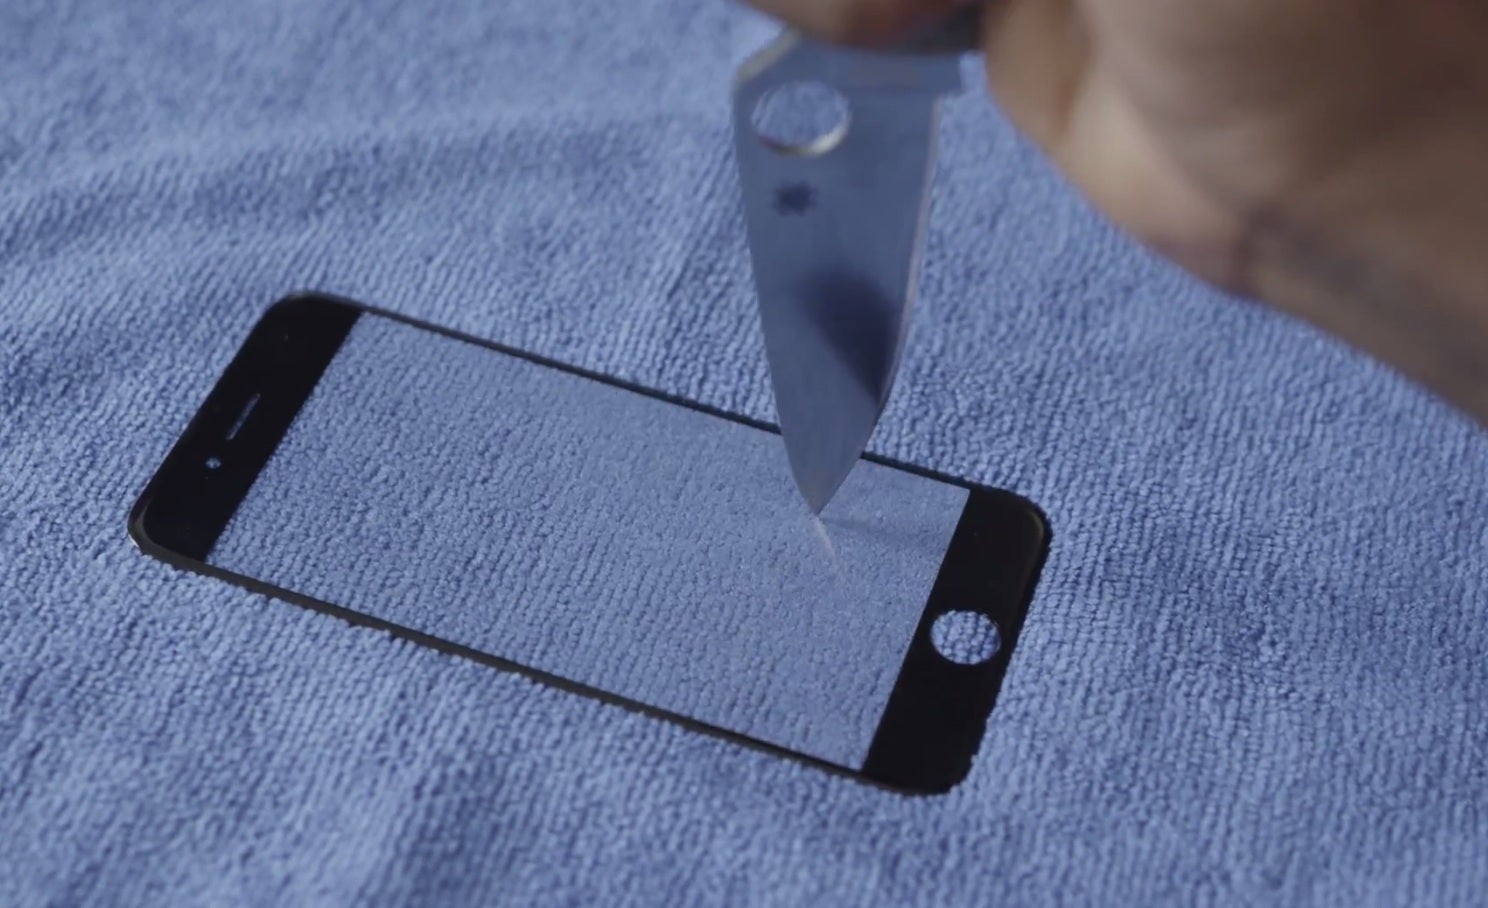 Now you can stab your iPhone to your heart's content!